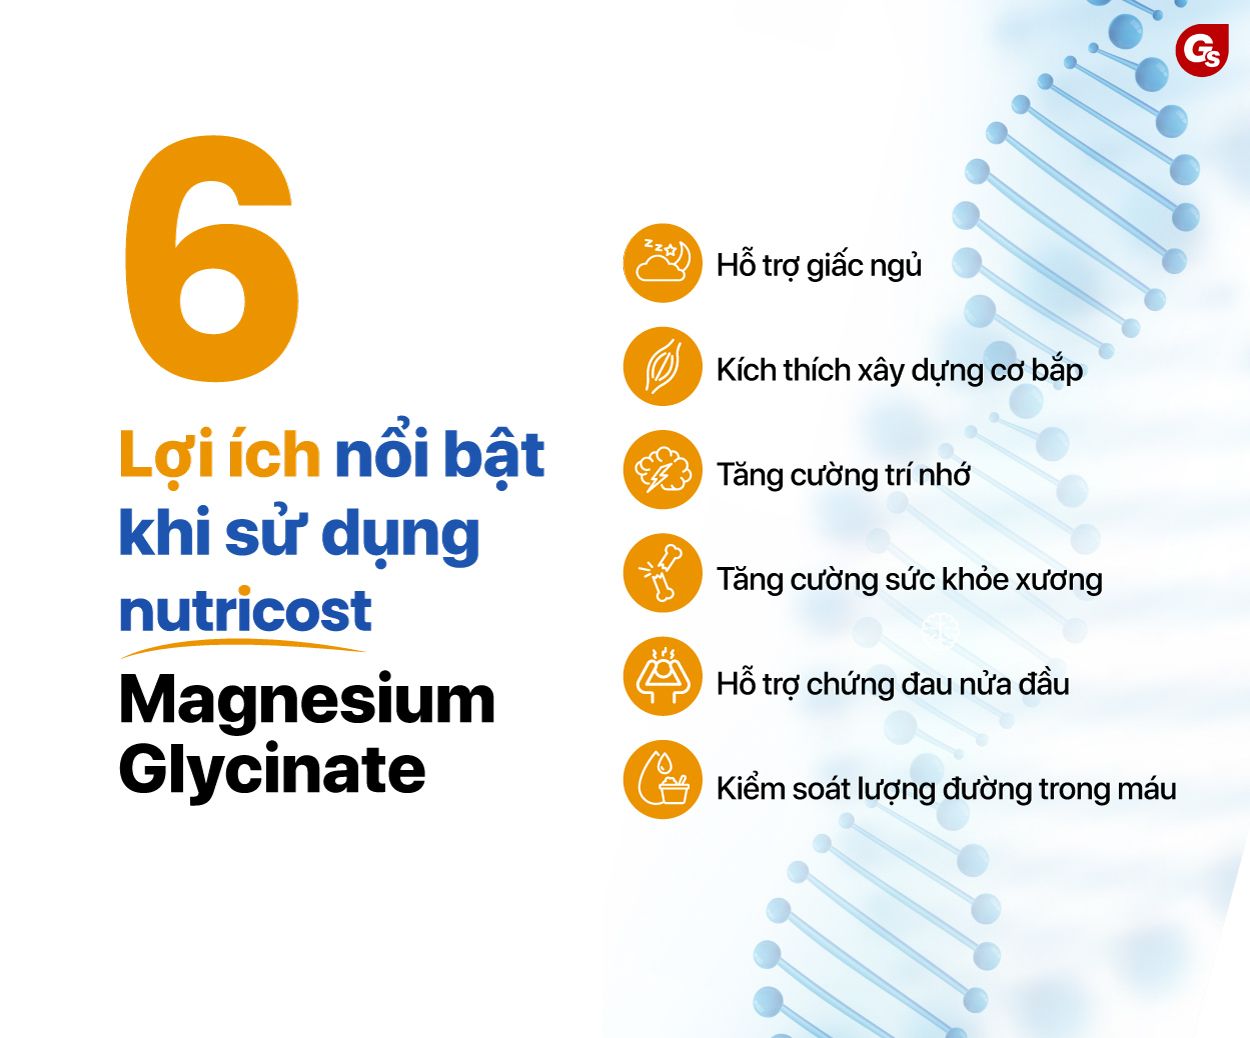 nutricost-magnesium-glycinate-powder-210-mg-bot-uong-bo-sung-magie-gymstore-2